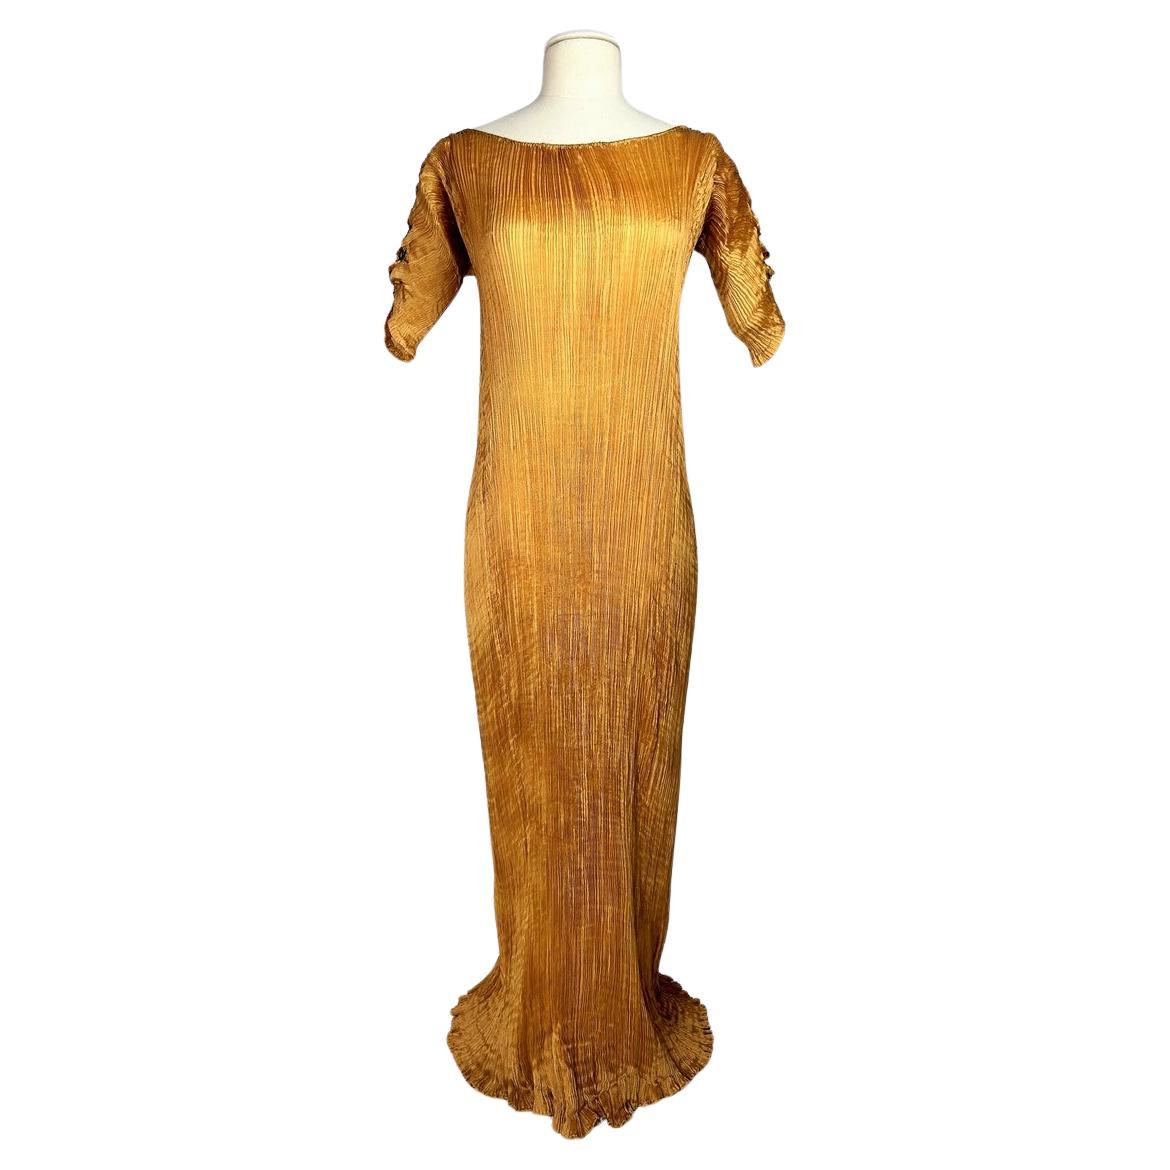 A Pleated Silk Delphos dress by Mariano Fortuny - Venice Circa 1930 For Sale